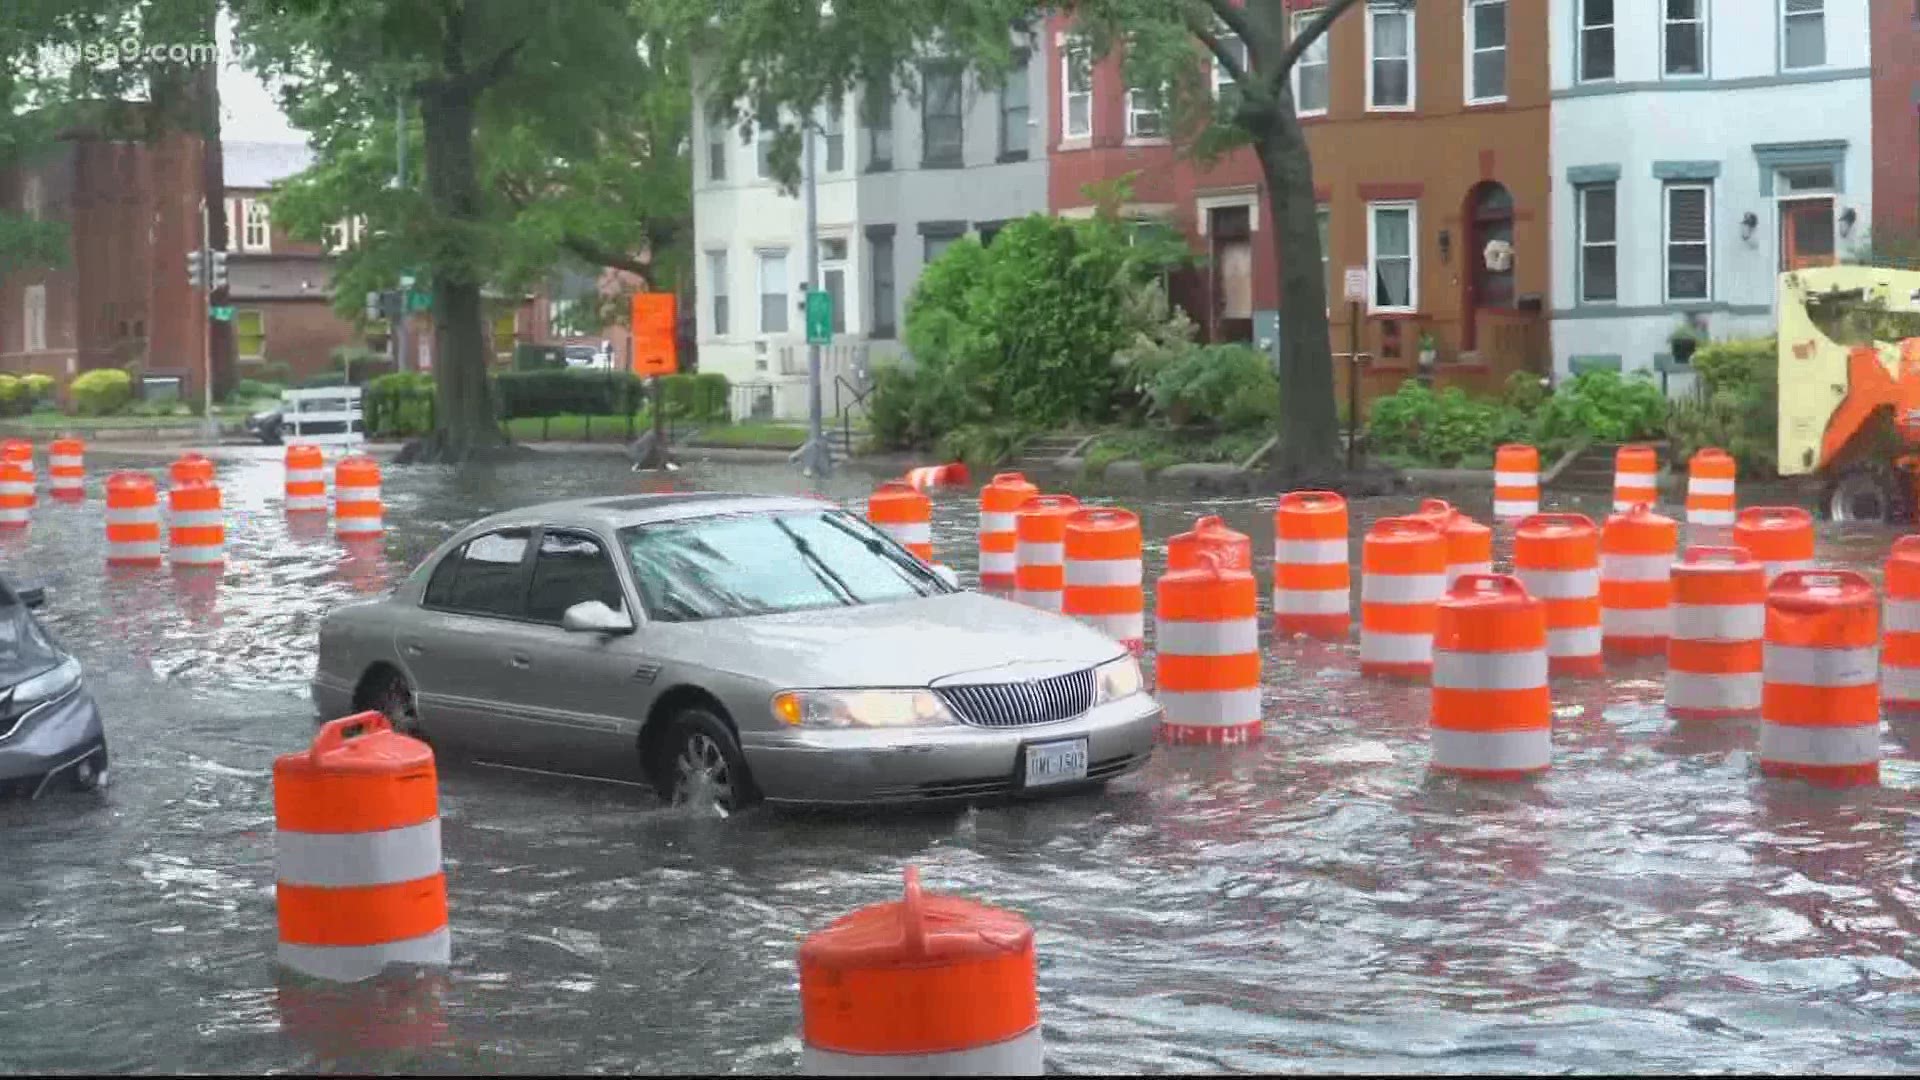 One car was seen reversing his car down Rhode Island Avenue after attempting to unsuccessfully trying to drive through 3-4 feet of flash flood waters.